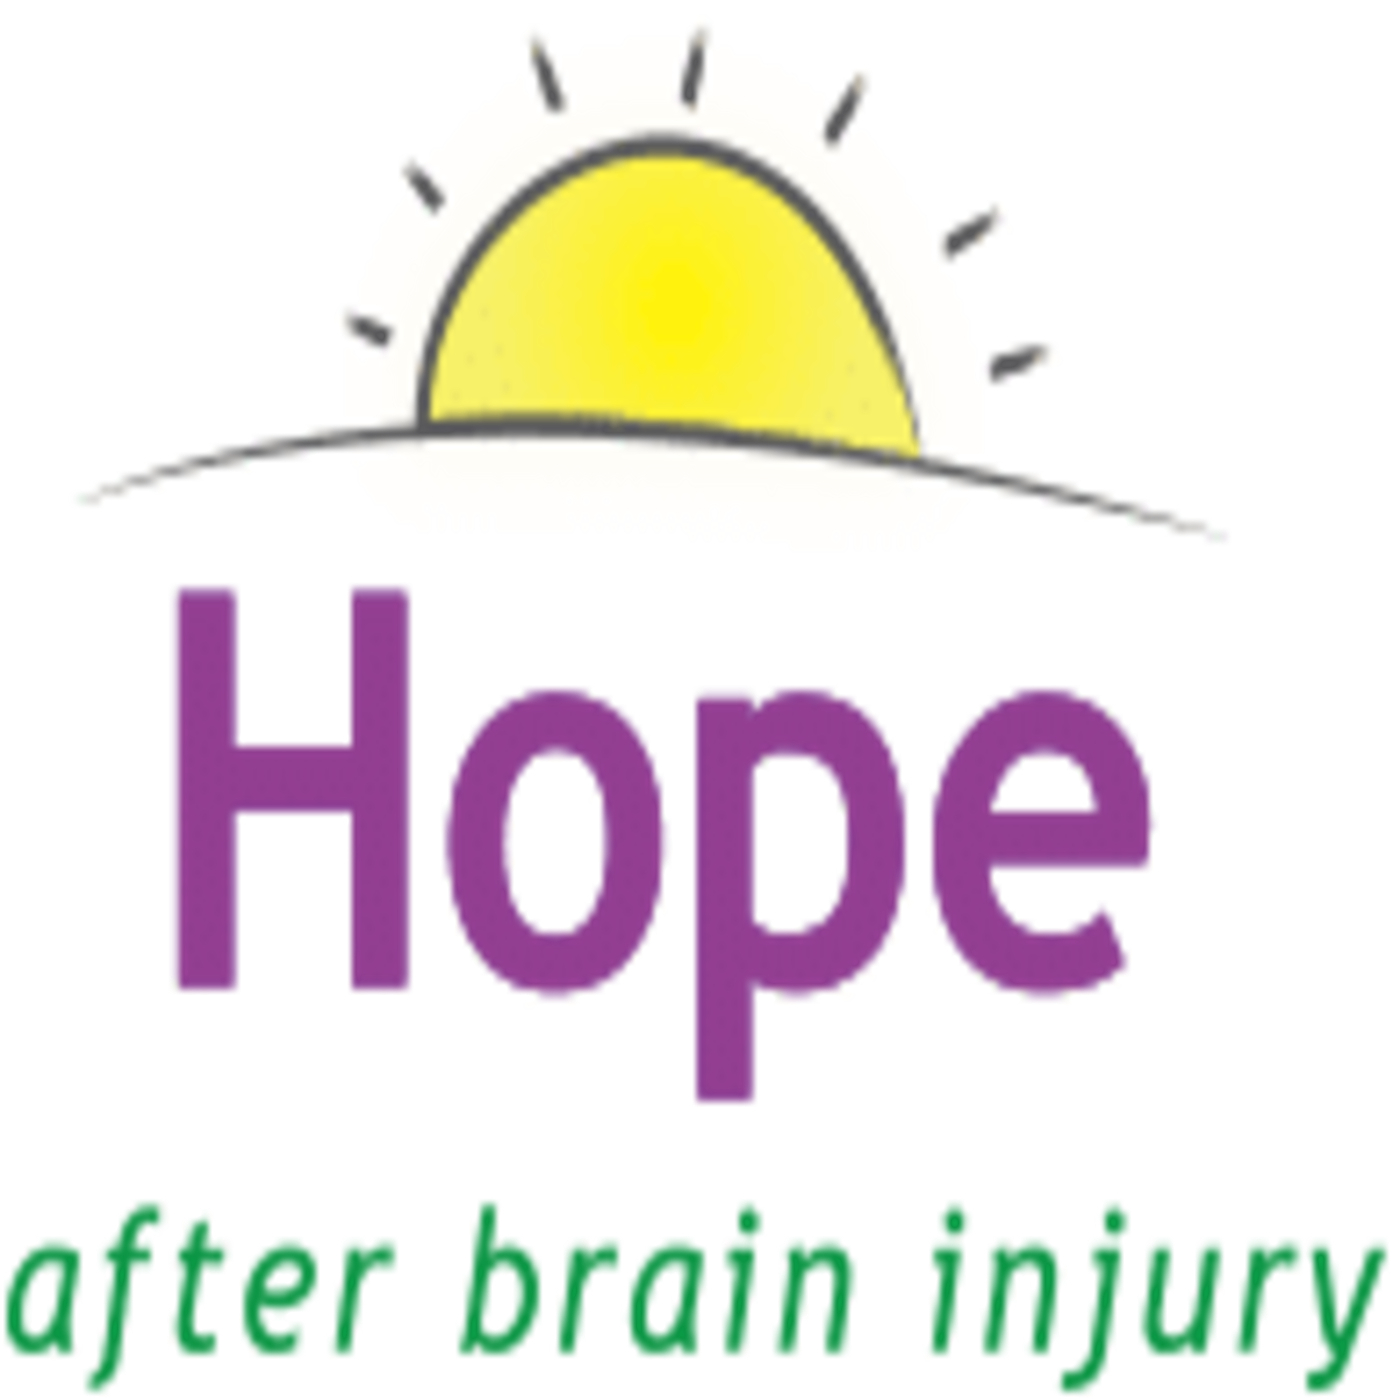 The hopeafterbraininjury's Podcast